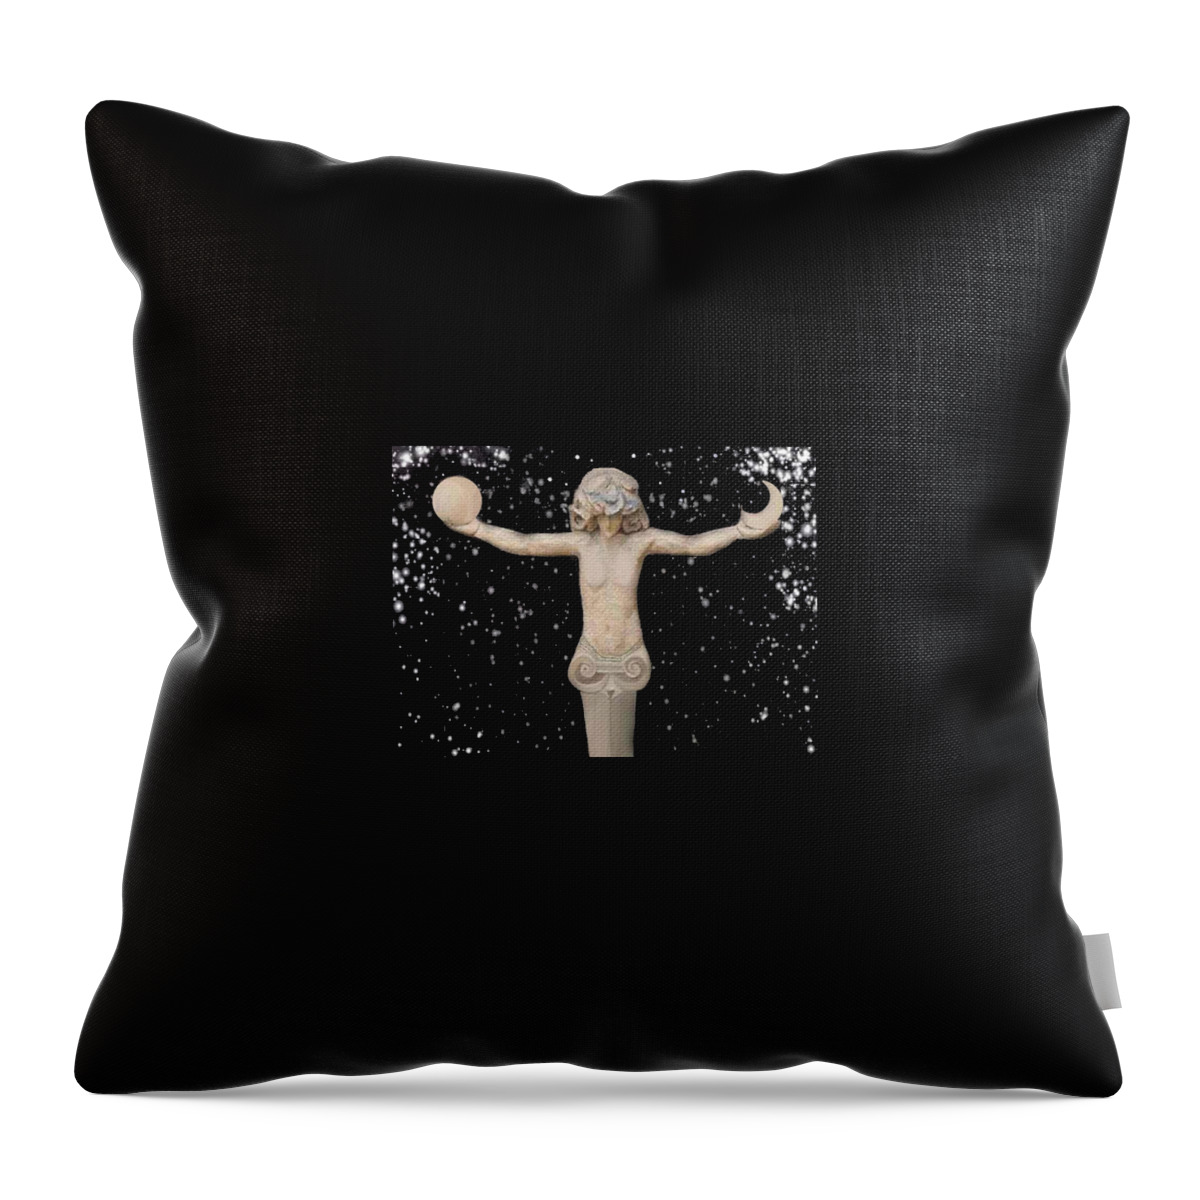 Astronomica Art Space Throw Pillow featuring the digital art Astronomica2 by Robert aka Bobby Ray Howle